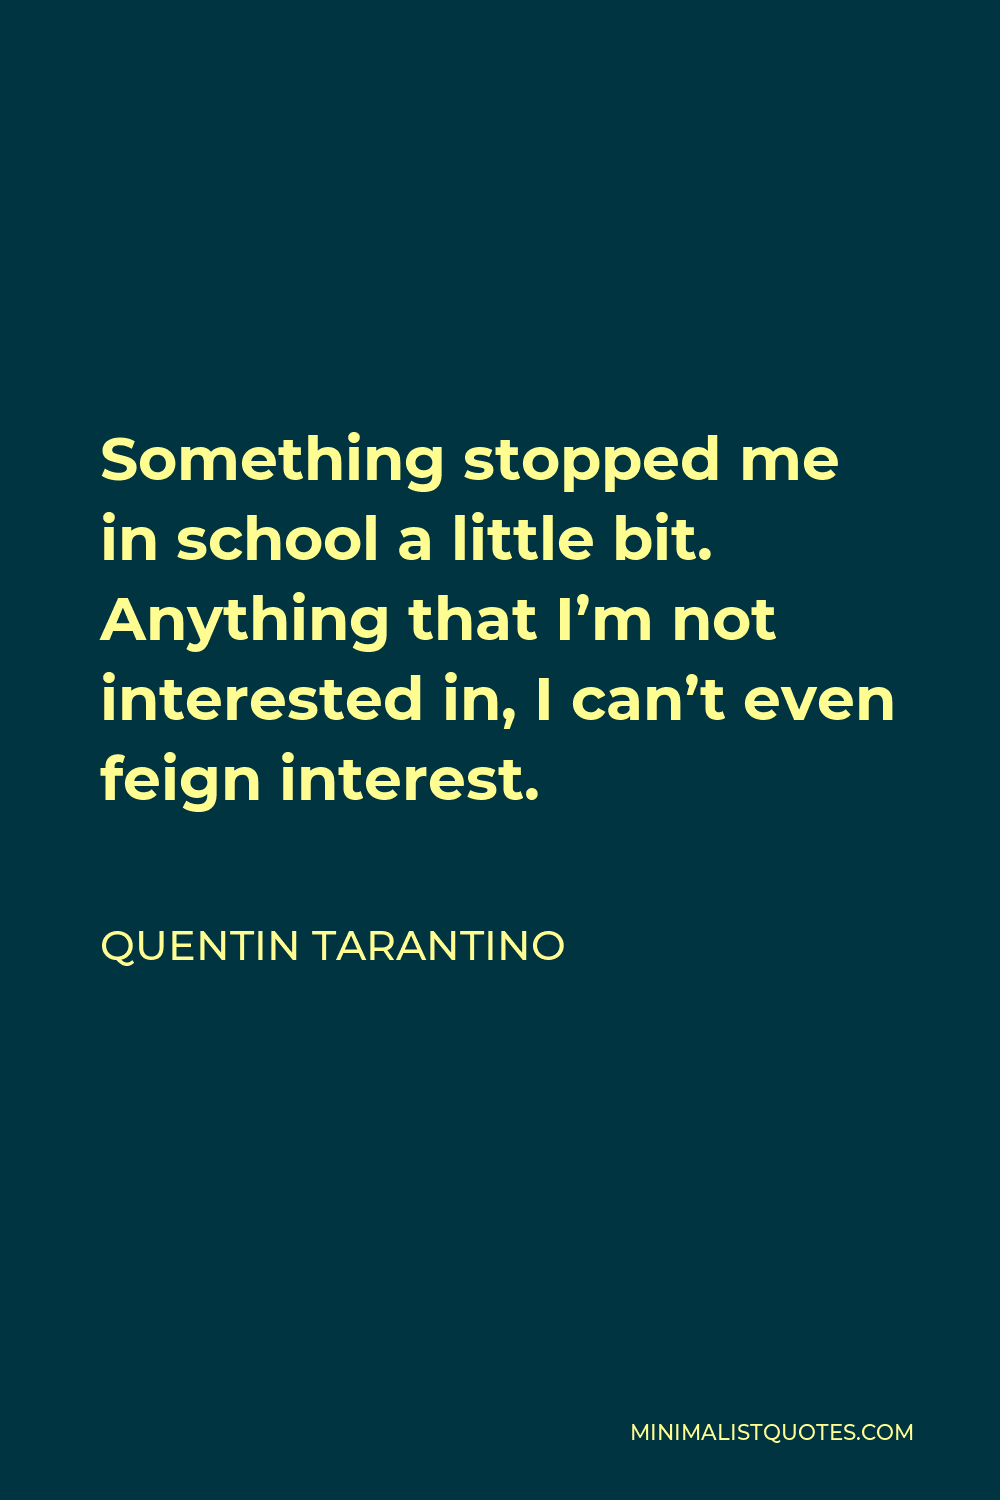 Quentin Tarantino Quote - Something stopped me in school a little bit. Anything that I’m not interested in, I can’t even feign interest.